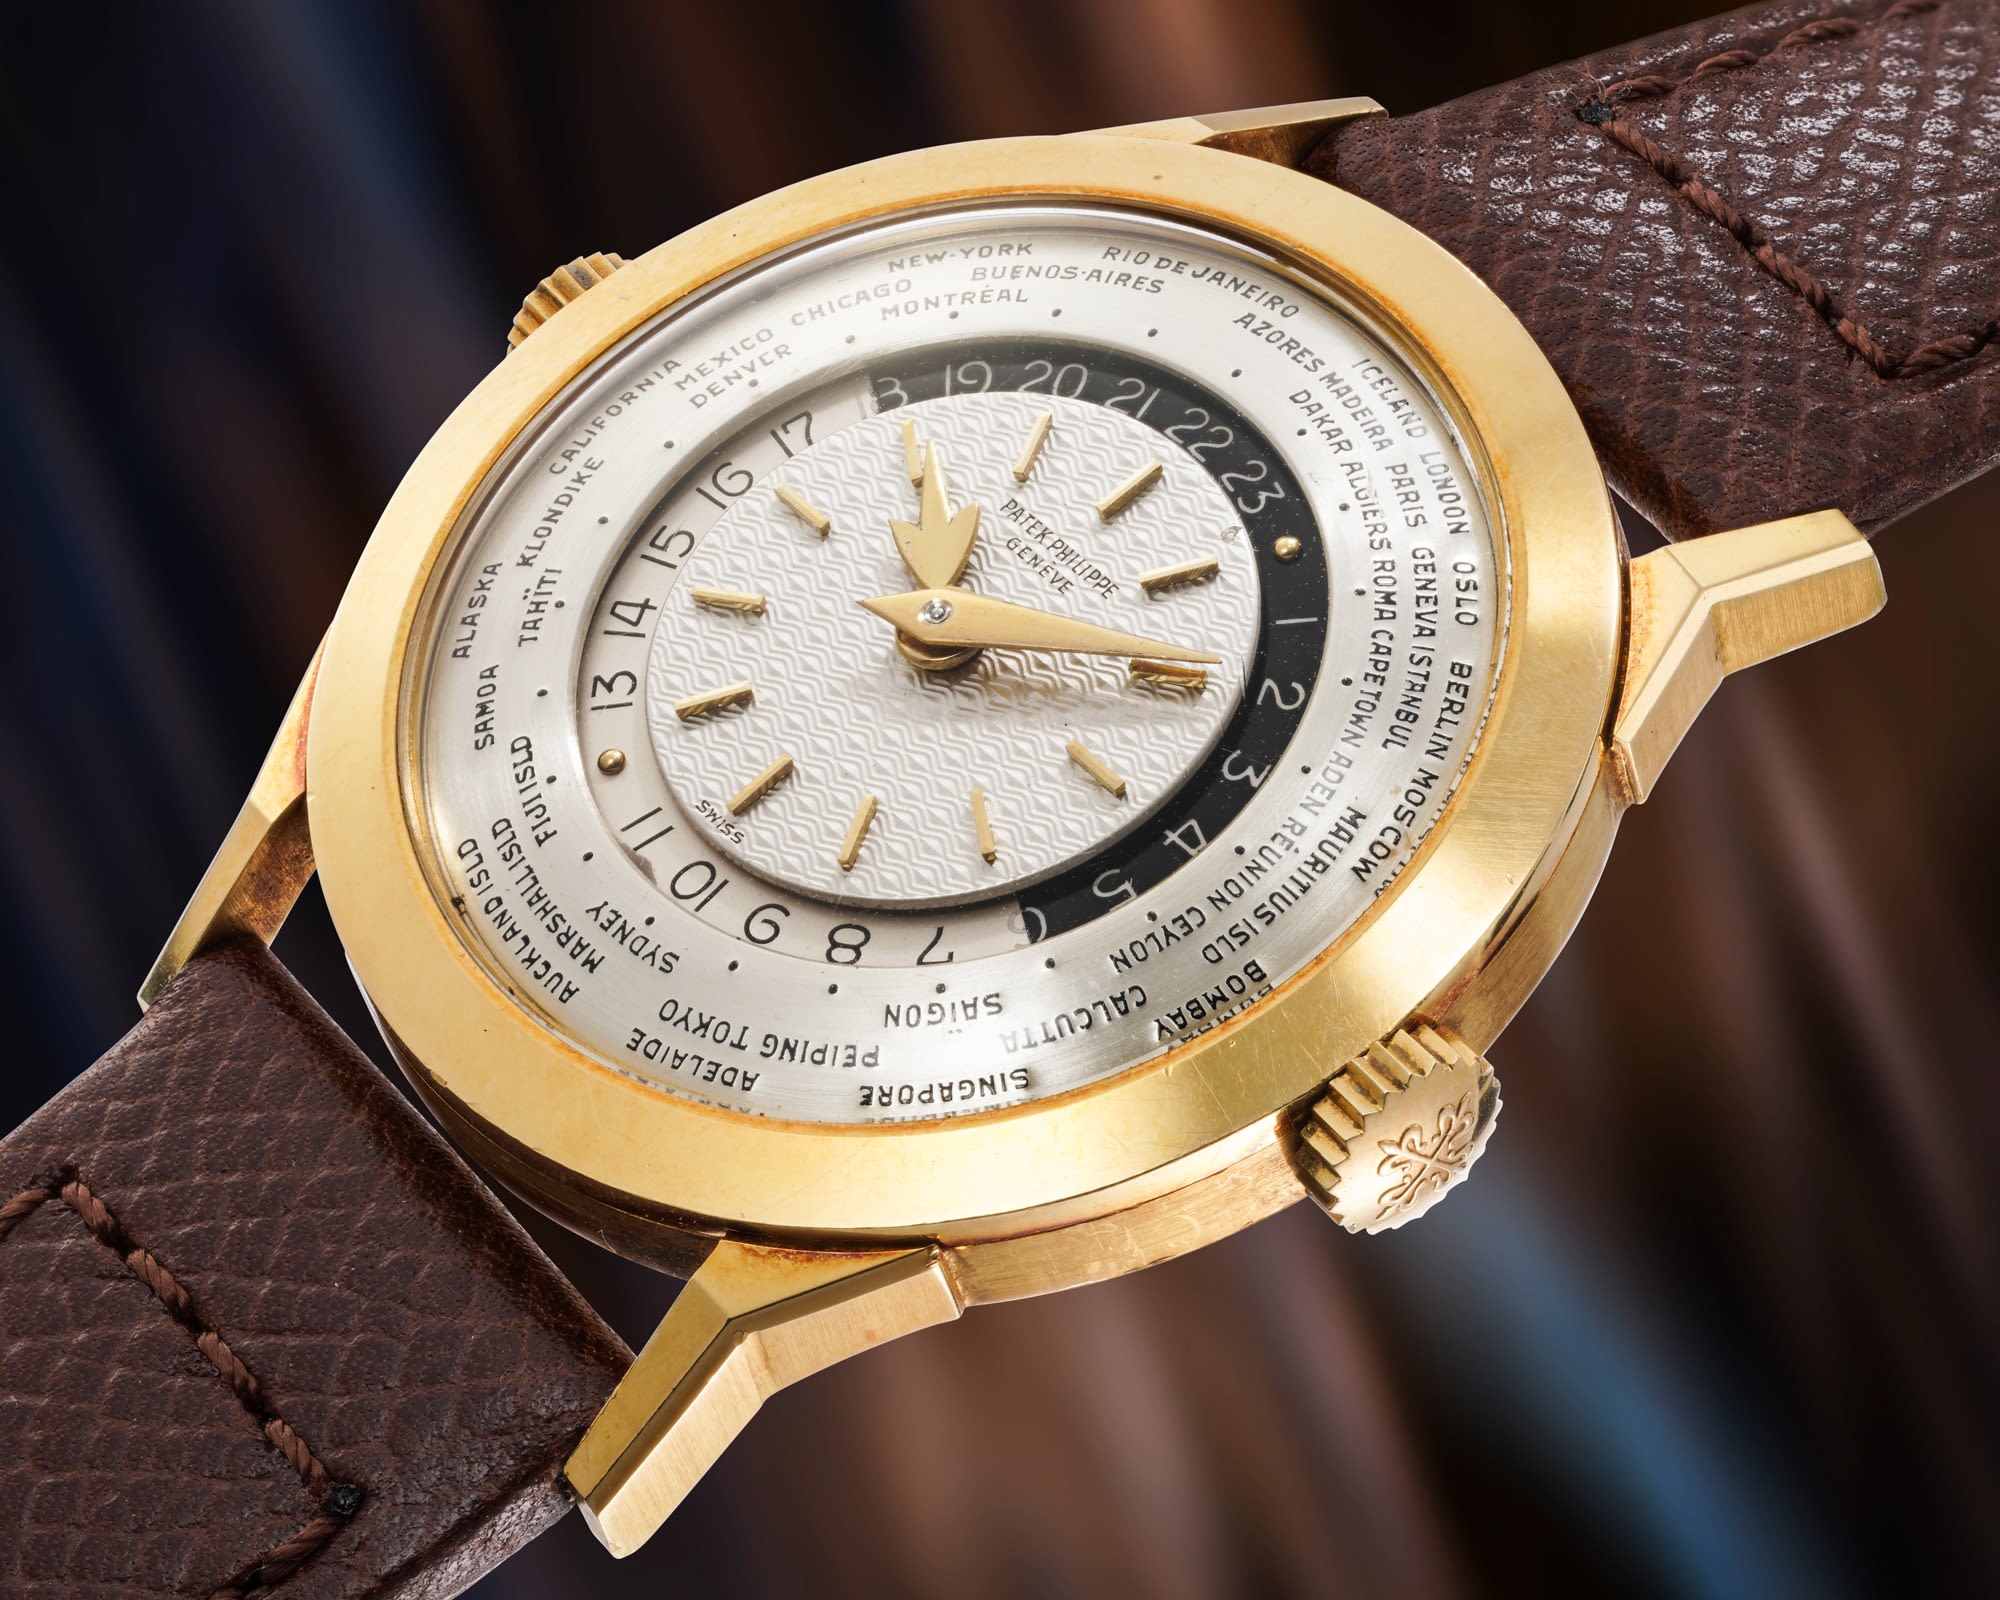 The Geneva Watch Auction: XIX featuring the Guido Mondani Collection